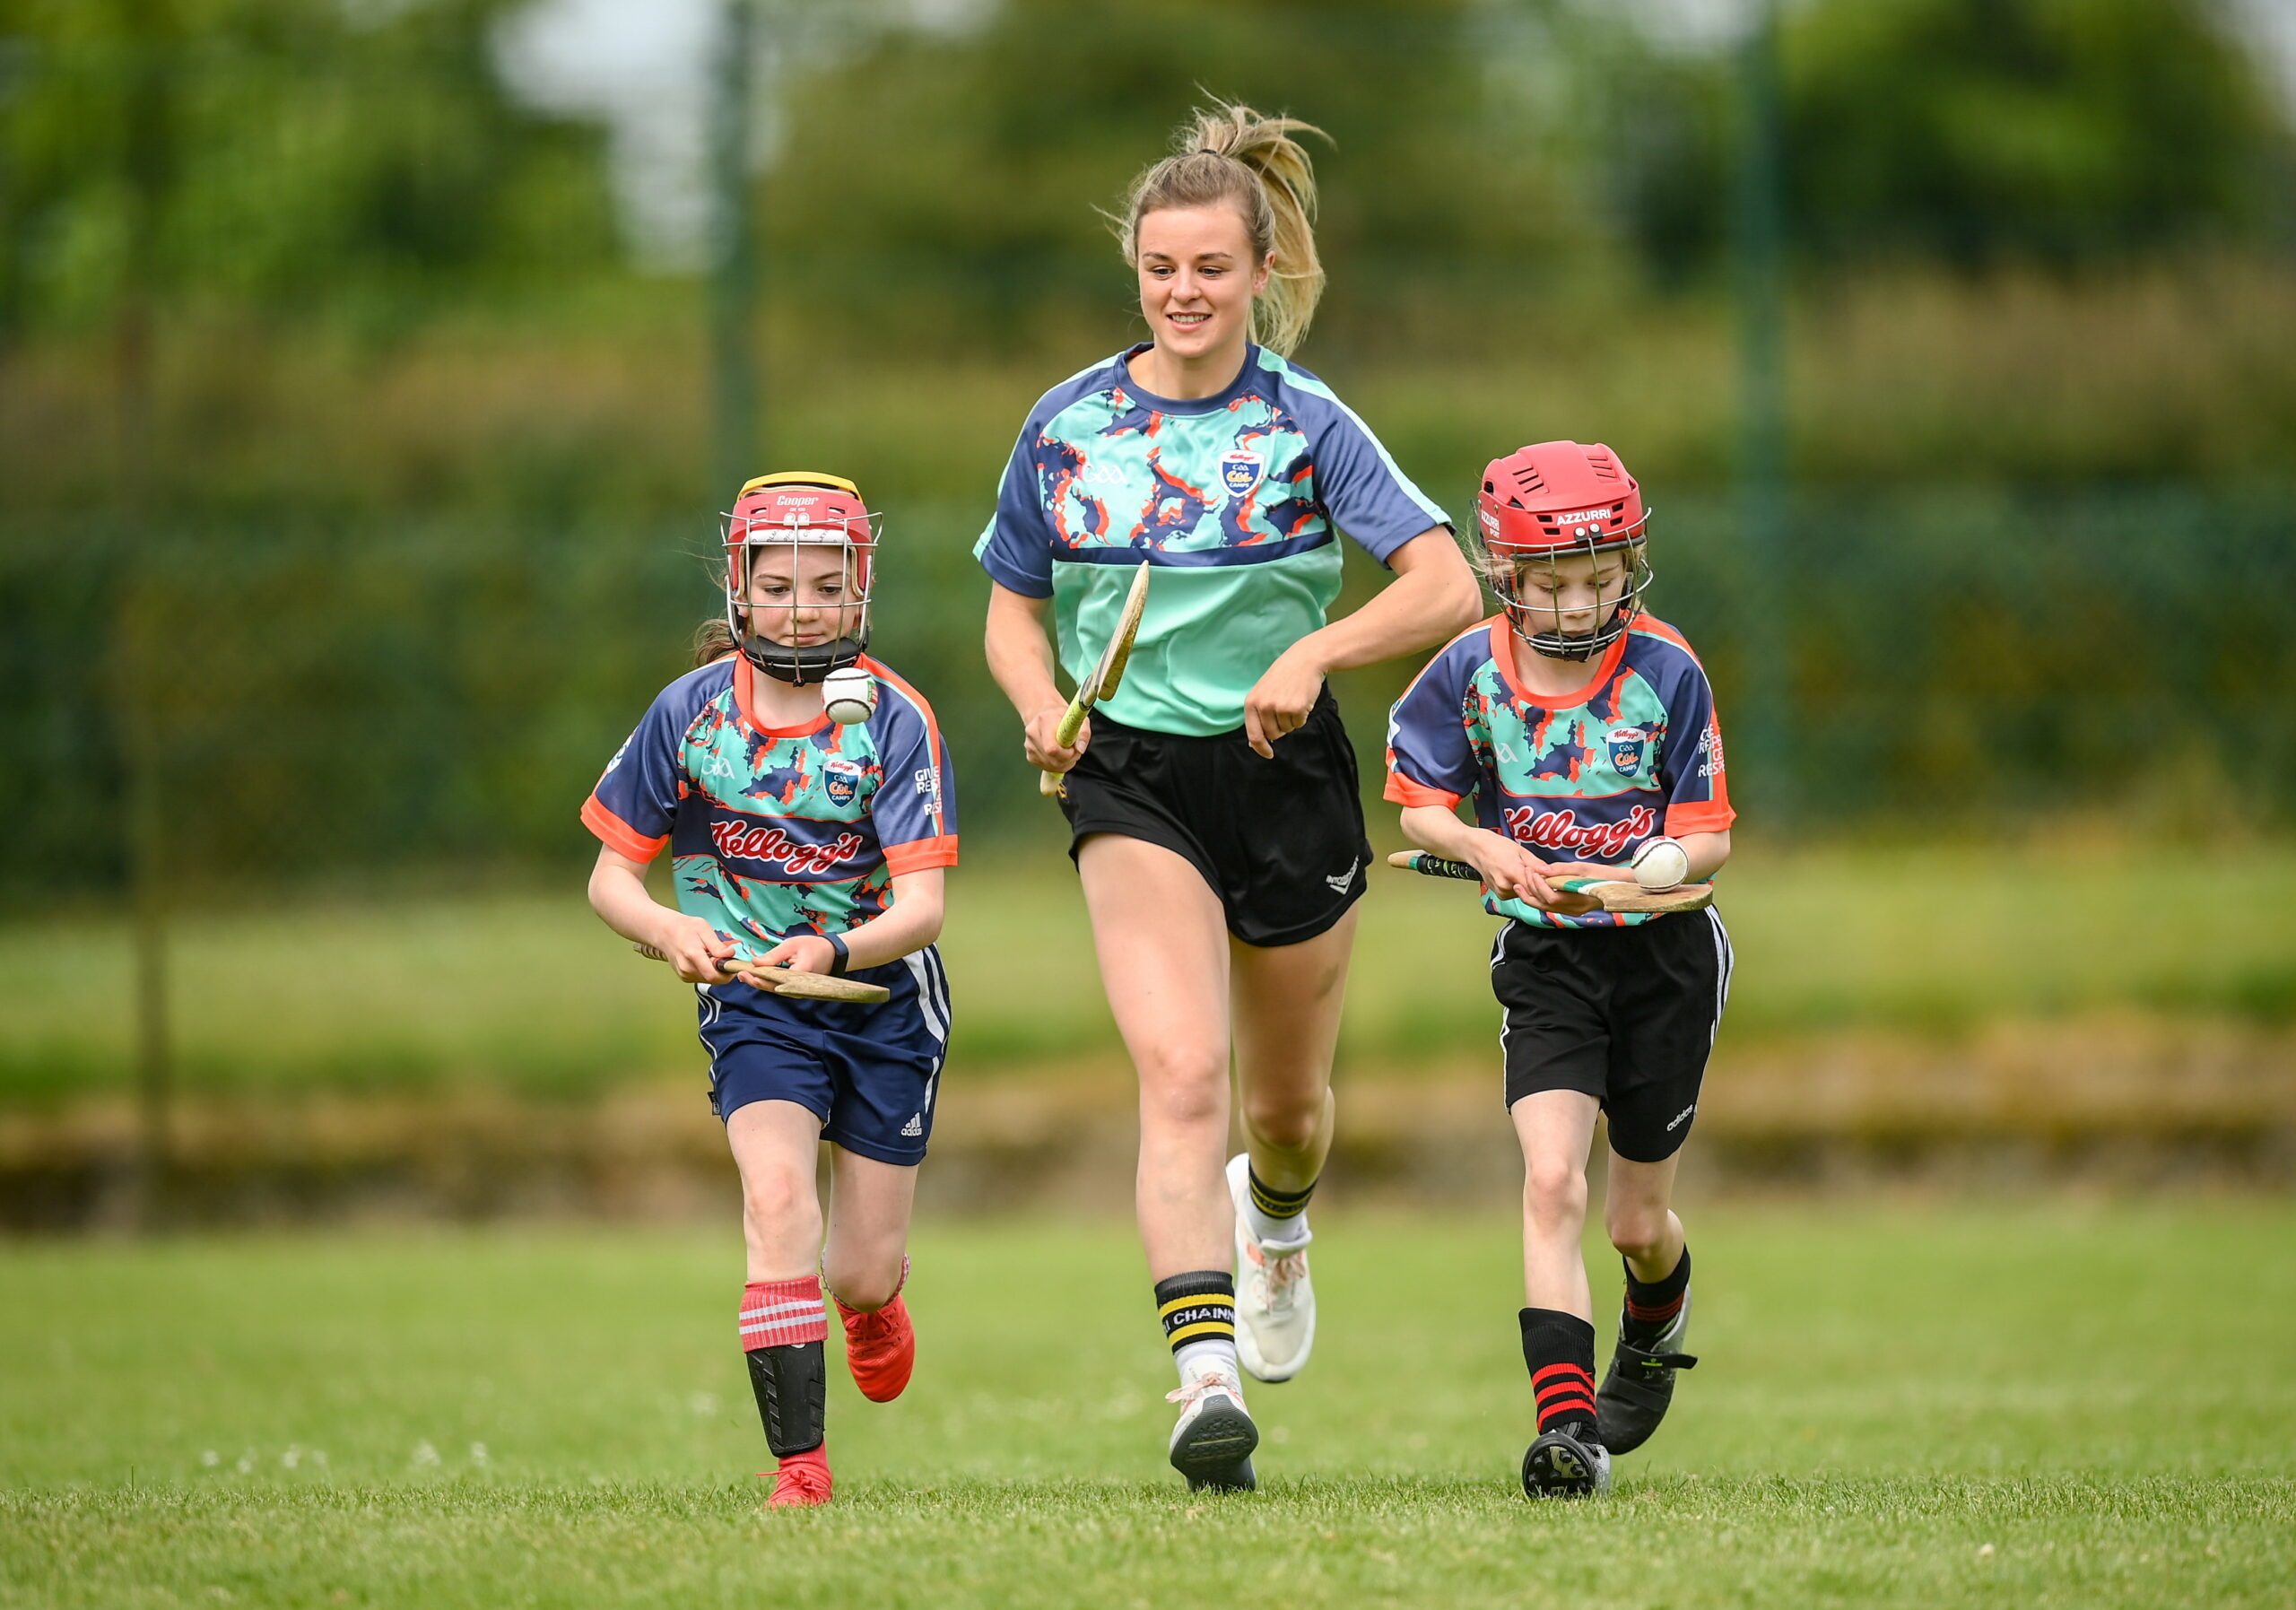 Summer up and running as Kellogg’s GAA Cúl Camps underway